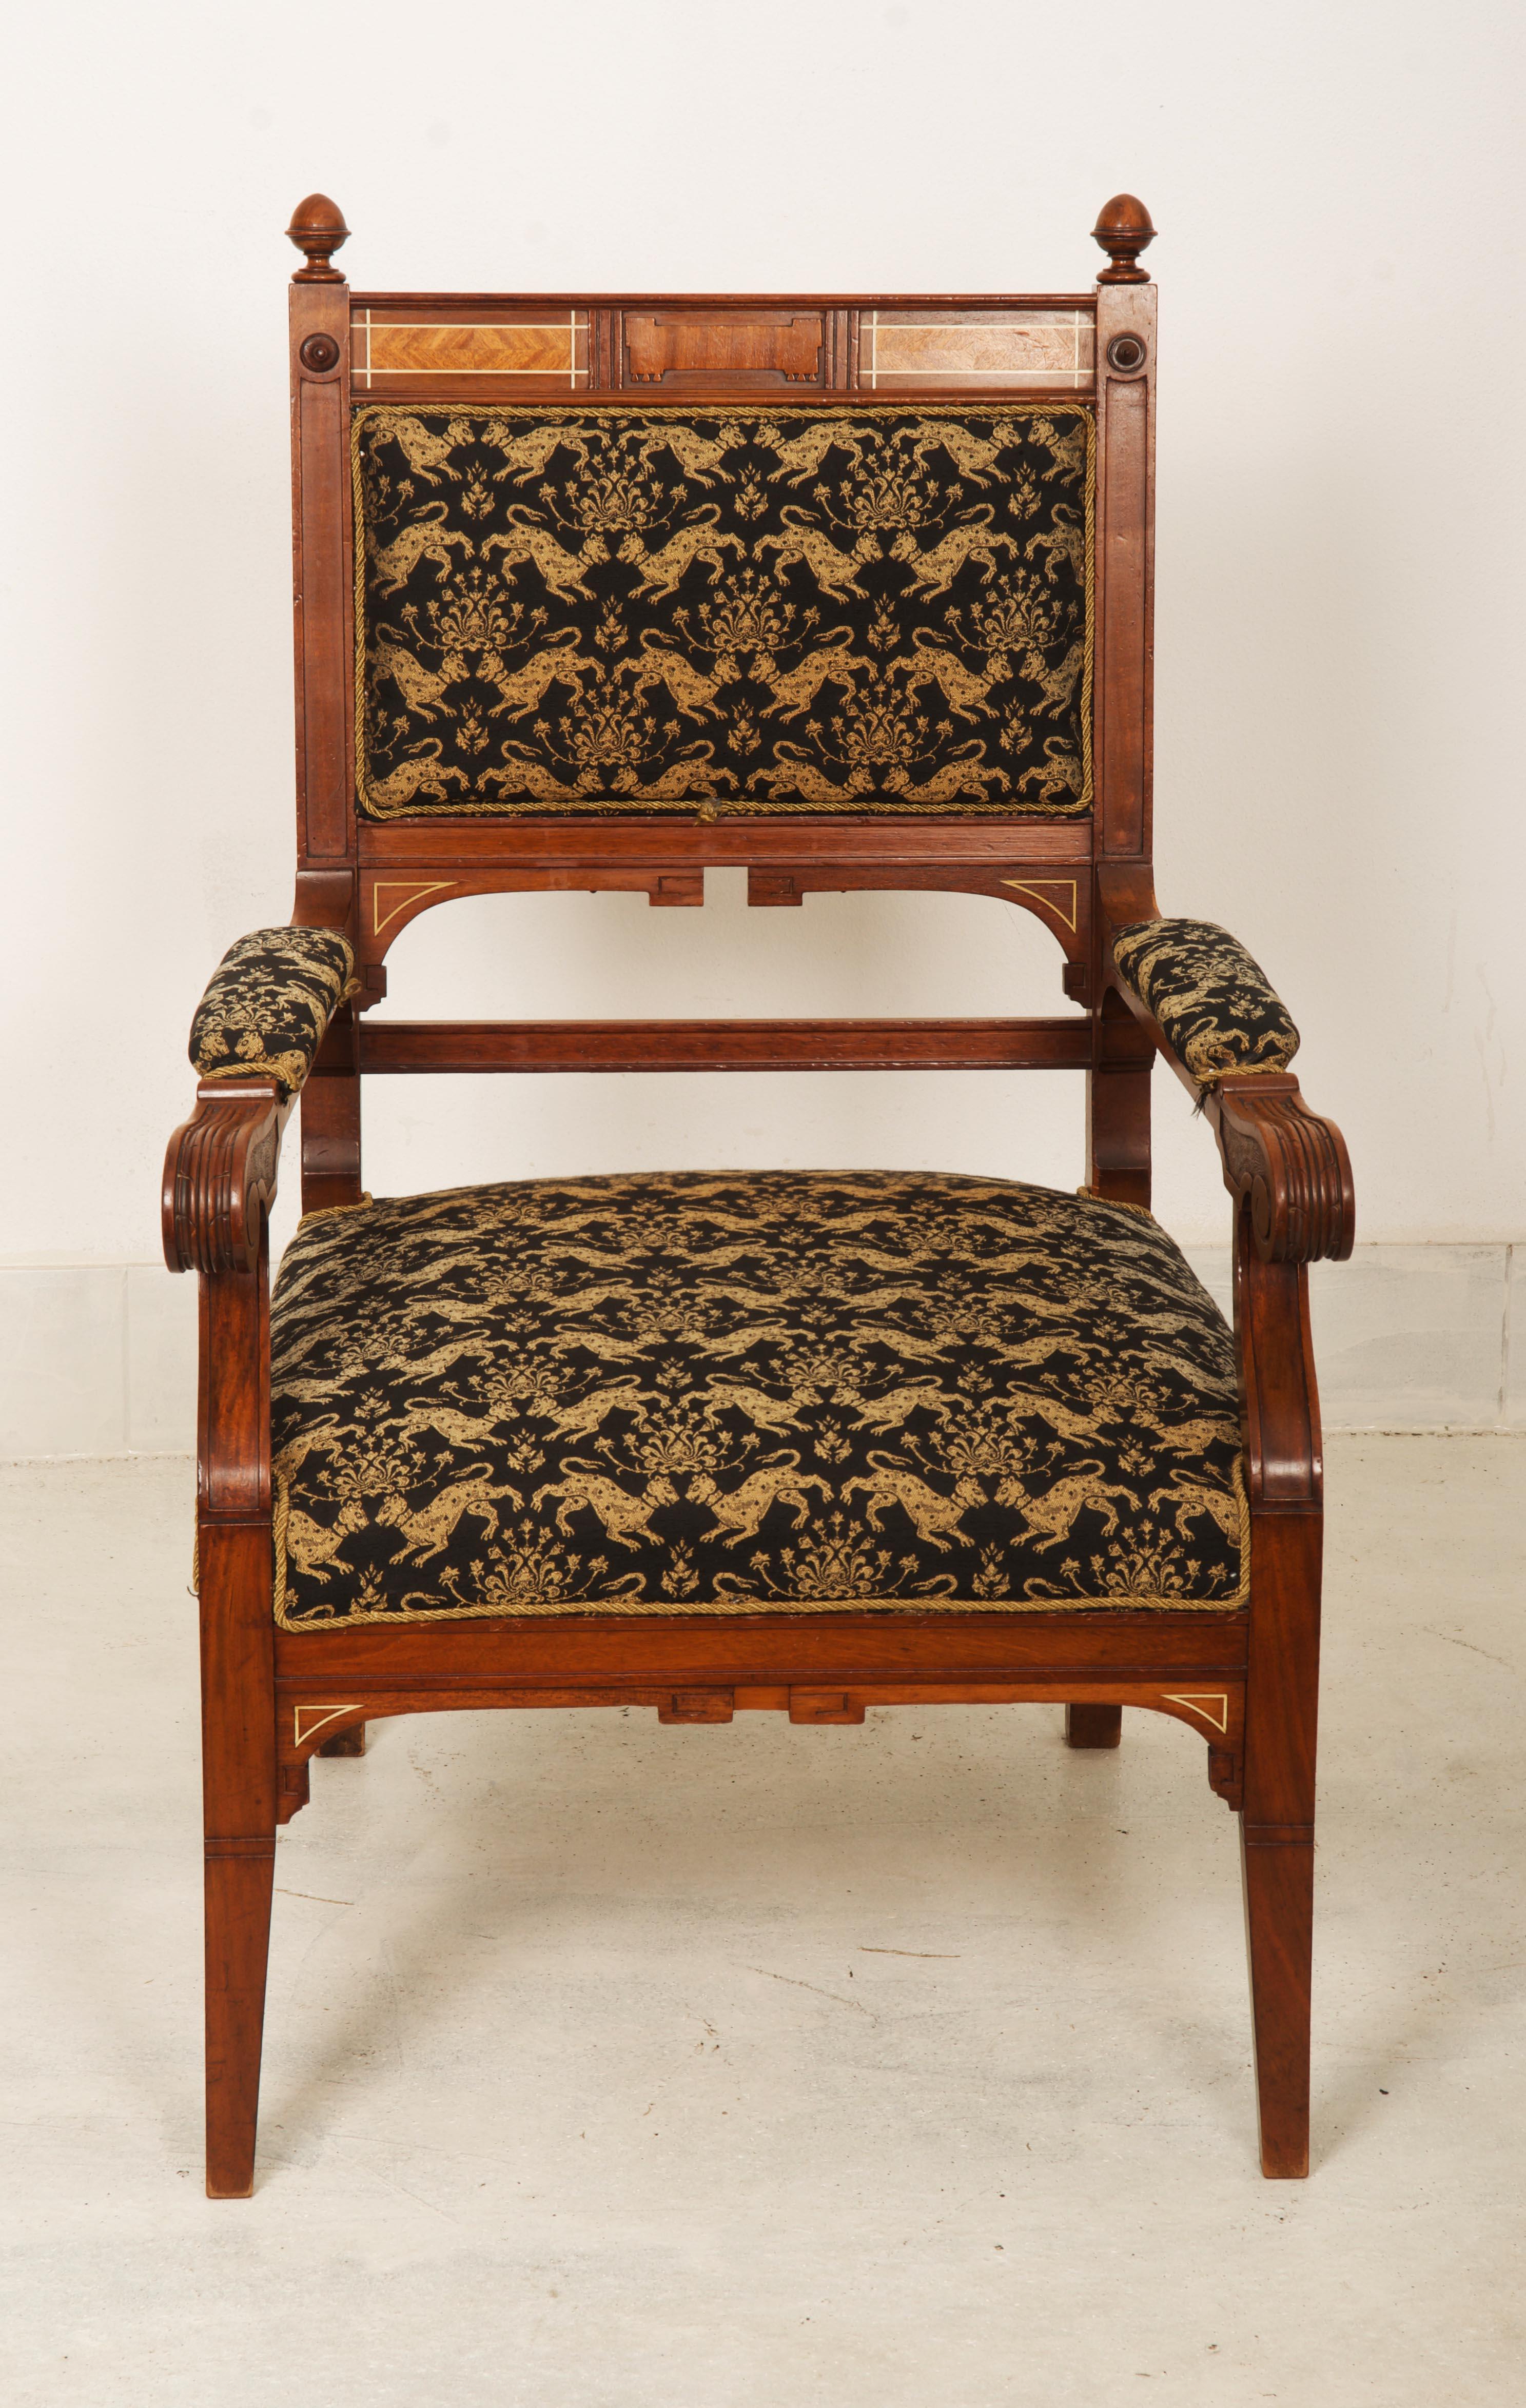 Hardwood frame with upholstered seat made in Germany in the 1880s.
     